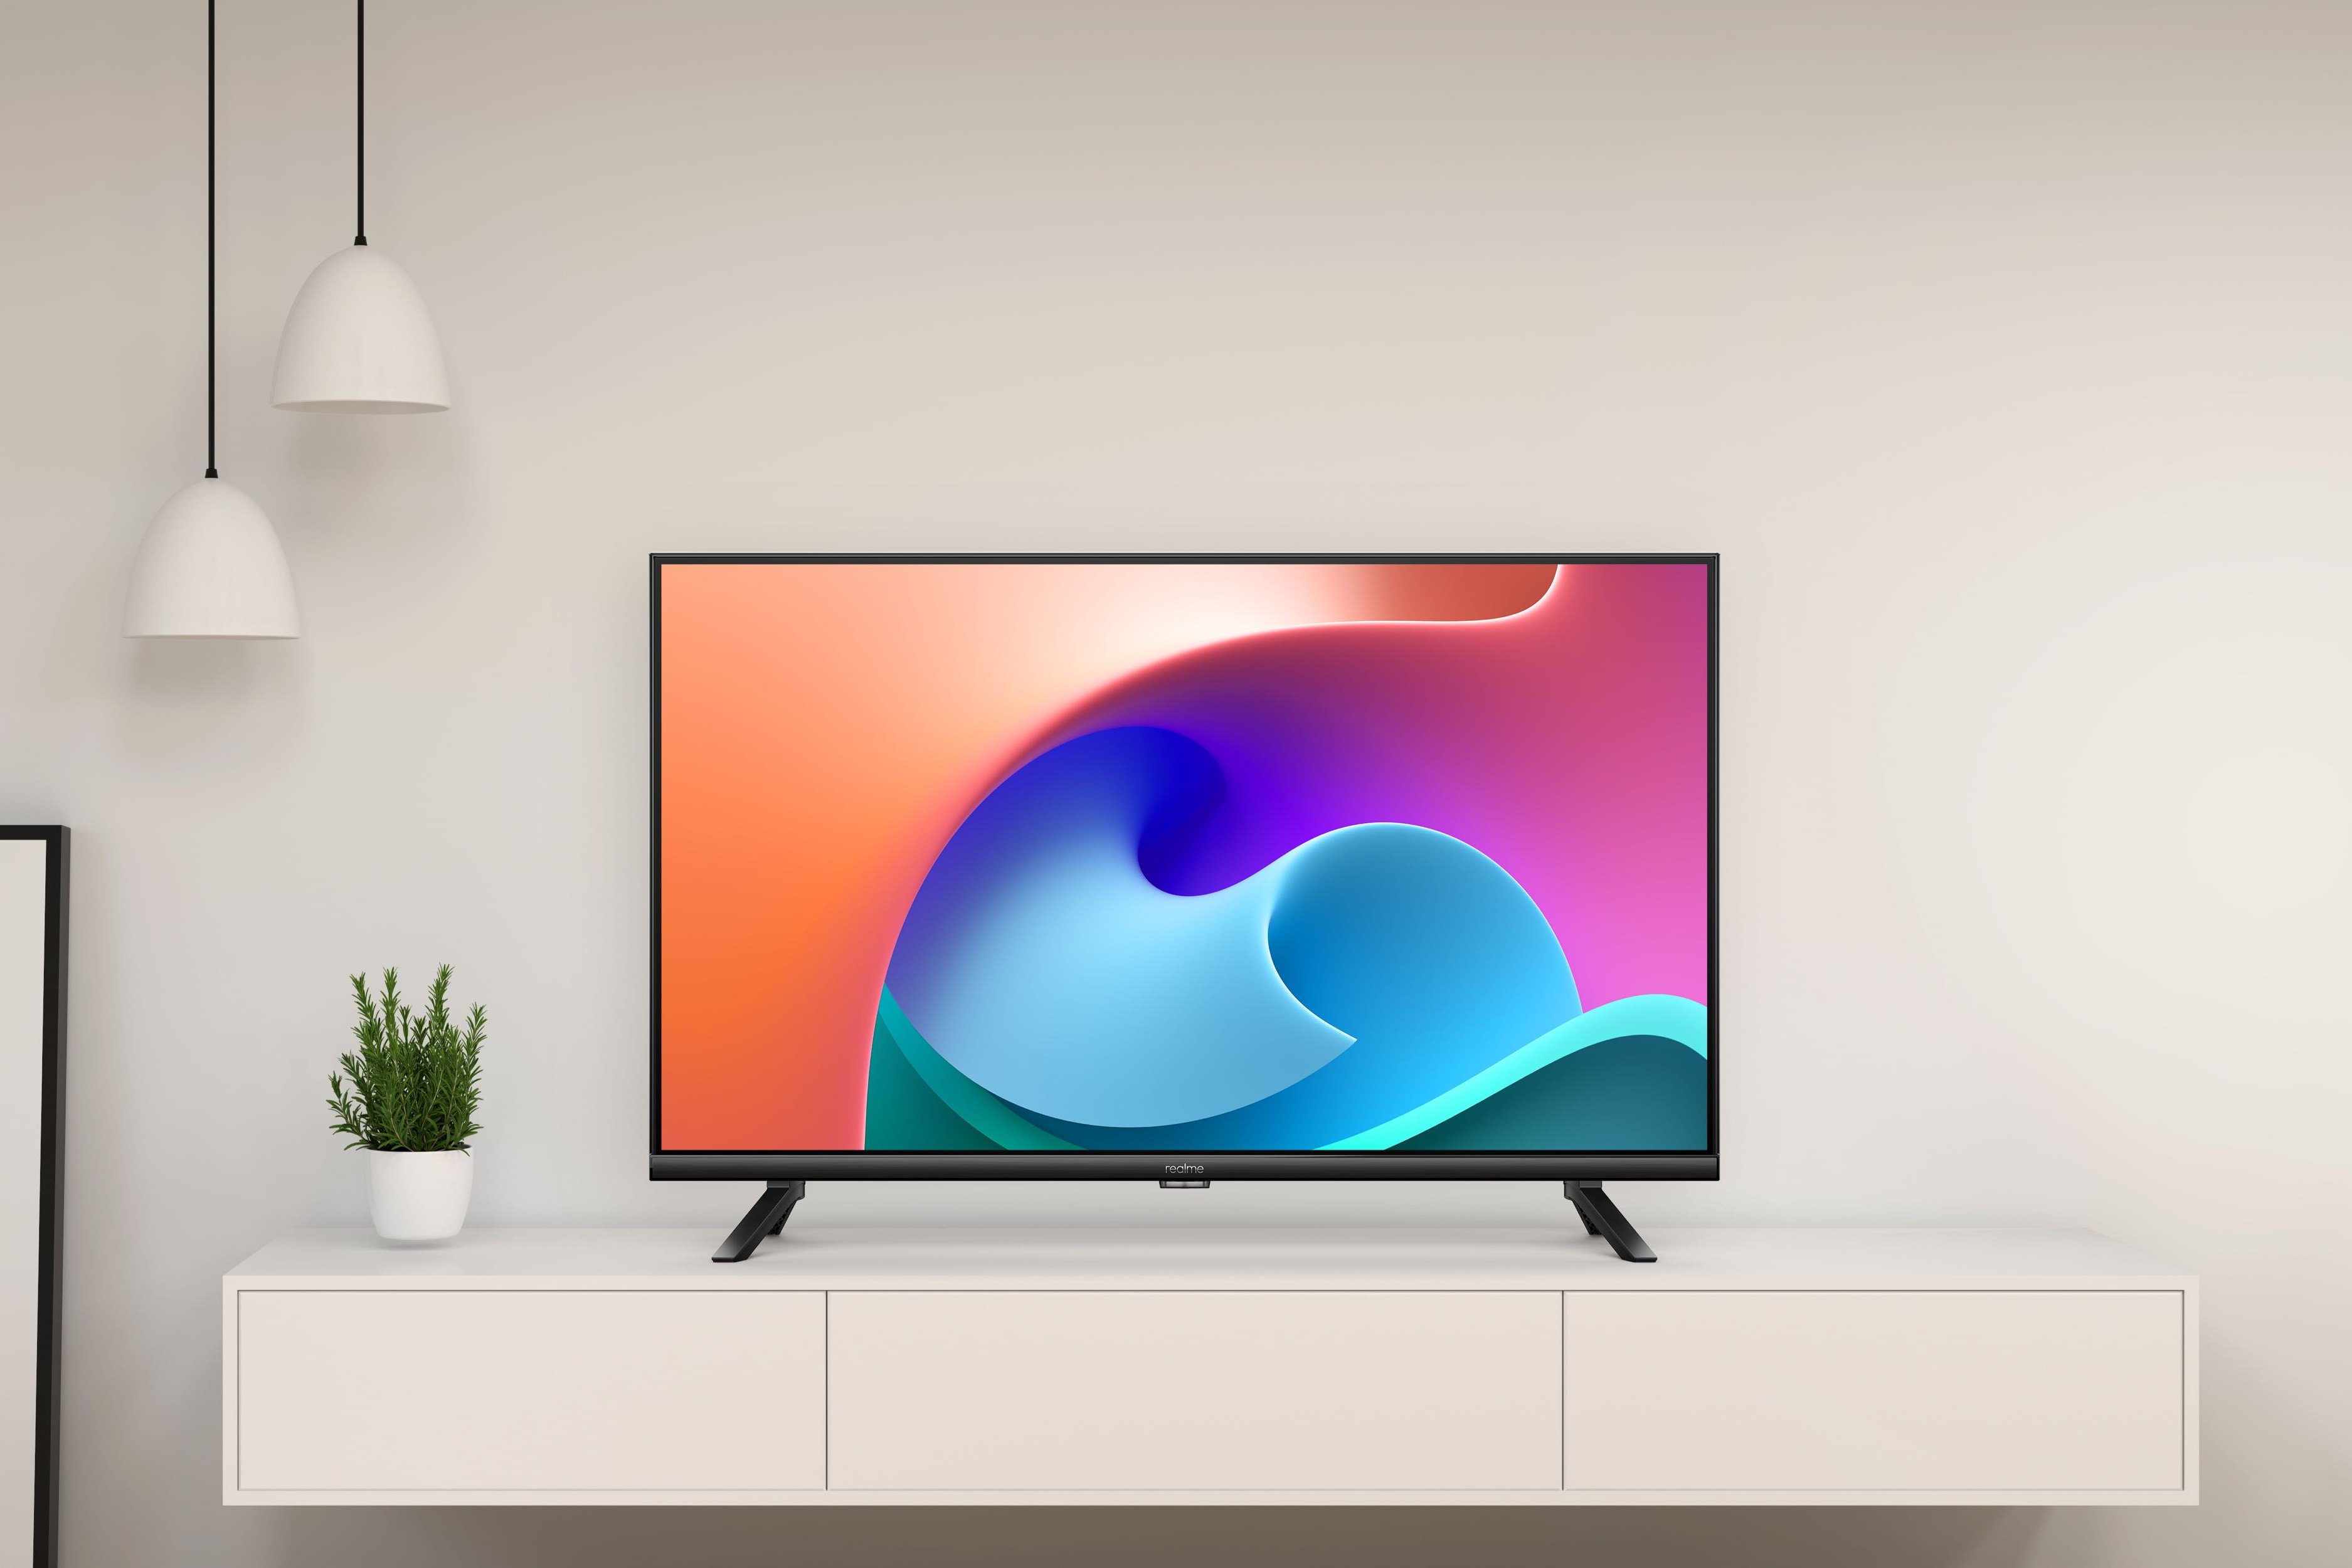 realme Smart TV Full HD 32" launched in India for ₹18,999 ($256) -  Gizmochina